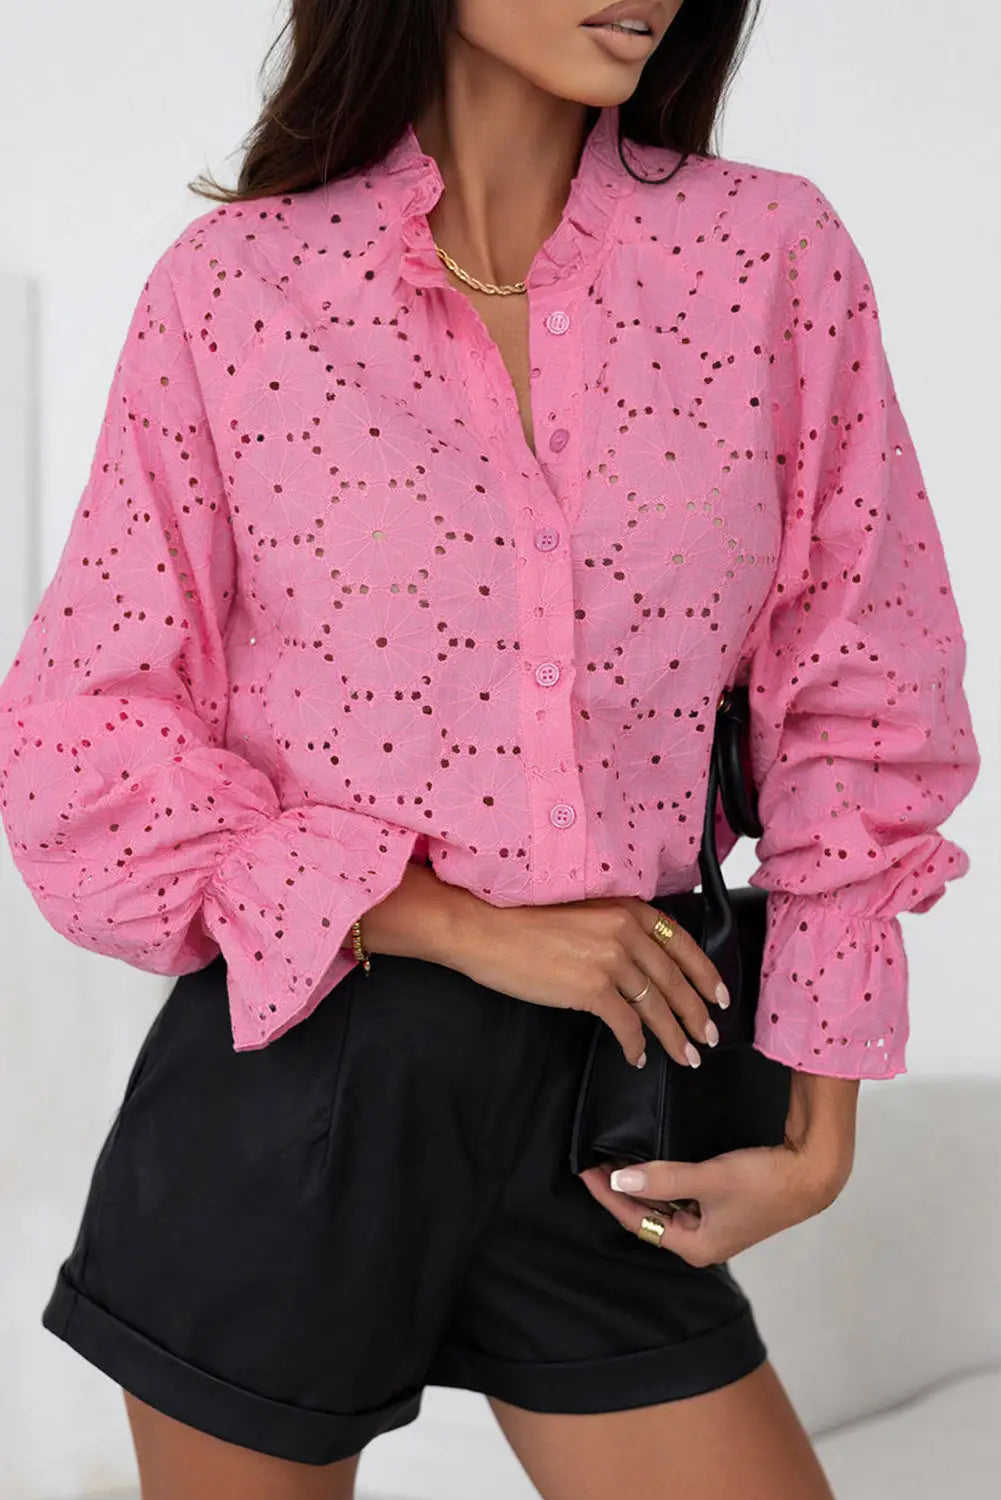 Pink hollow out embroidered floral shirt - s / 100% cotton - blouses & shirts